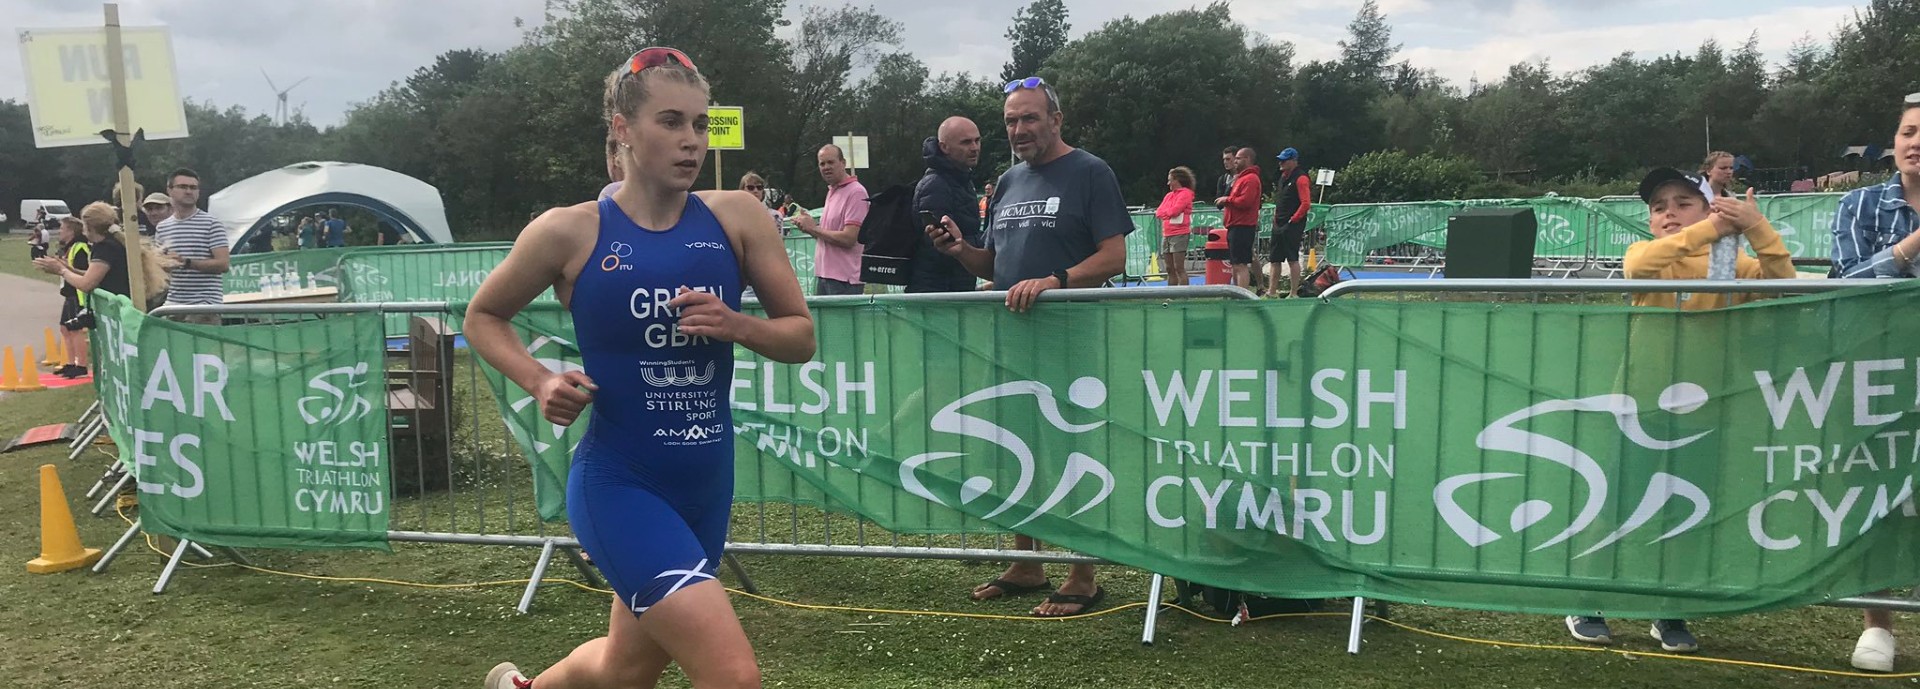 Sophia Green running at the World Junior Championships qualifying event in Wales